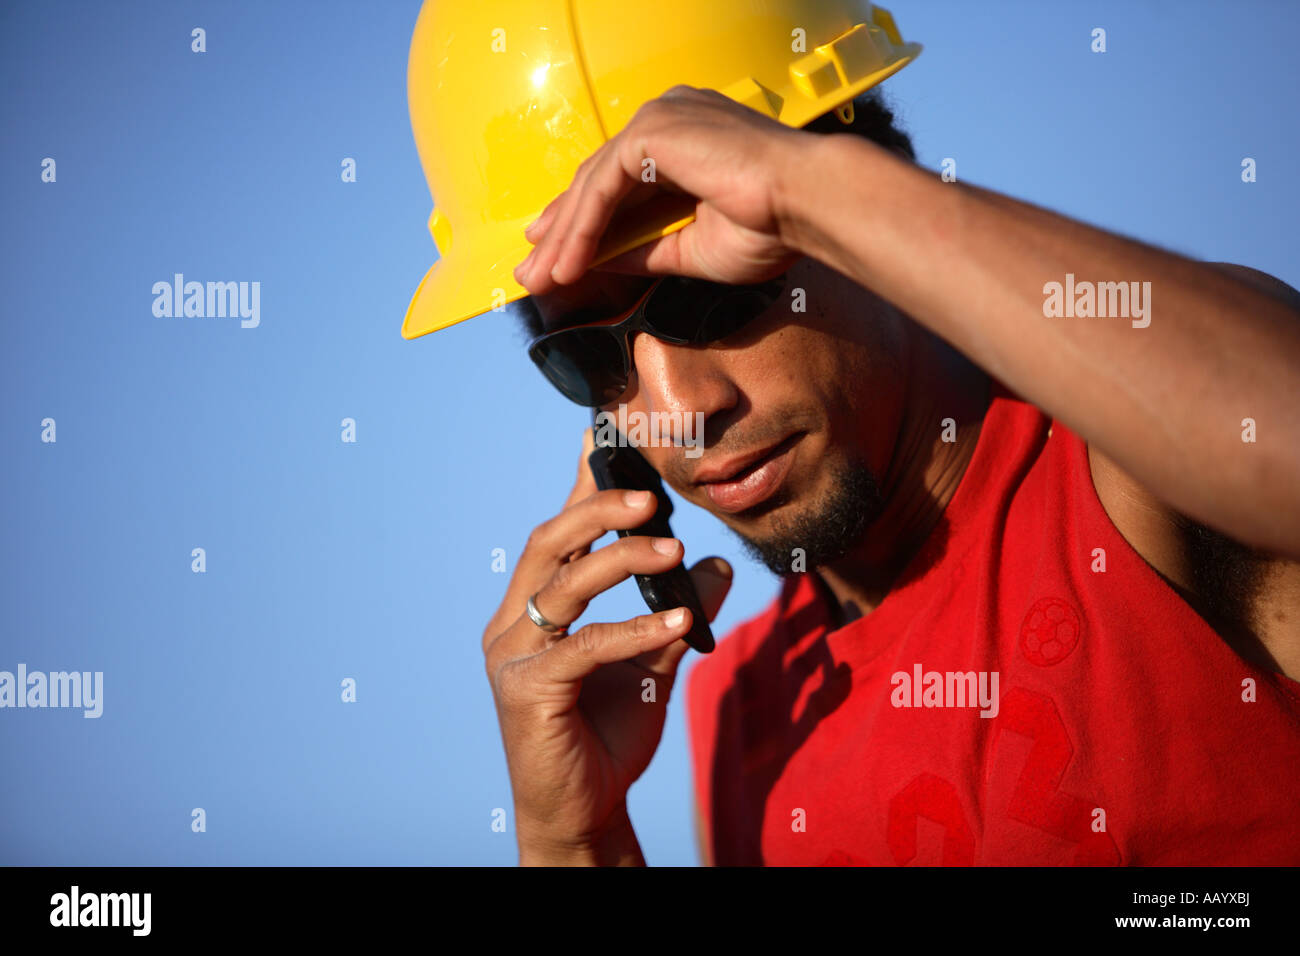 Construction Worker talking on cell phone Banque D'Images